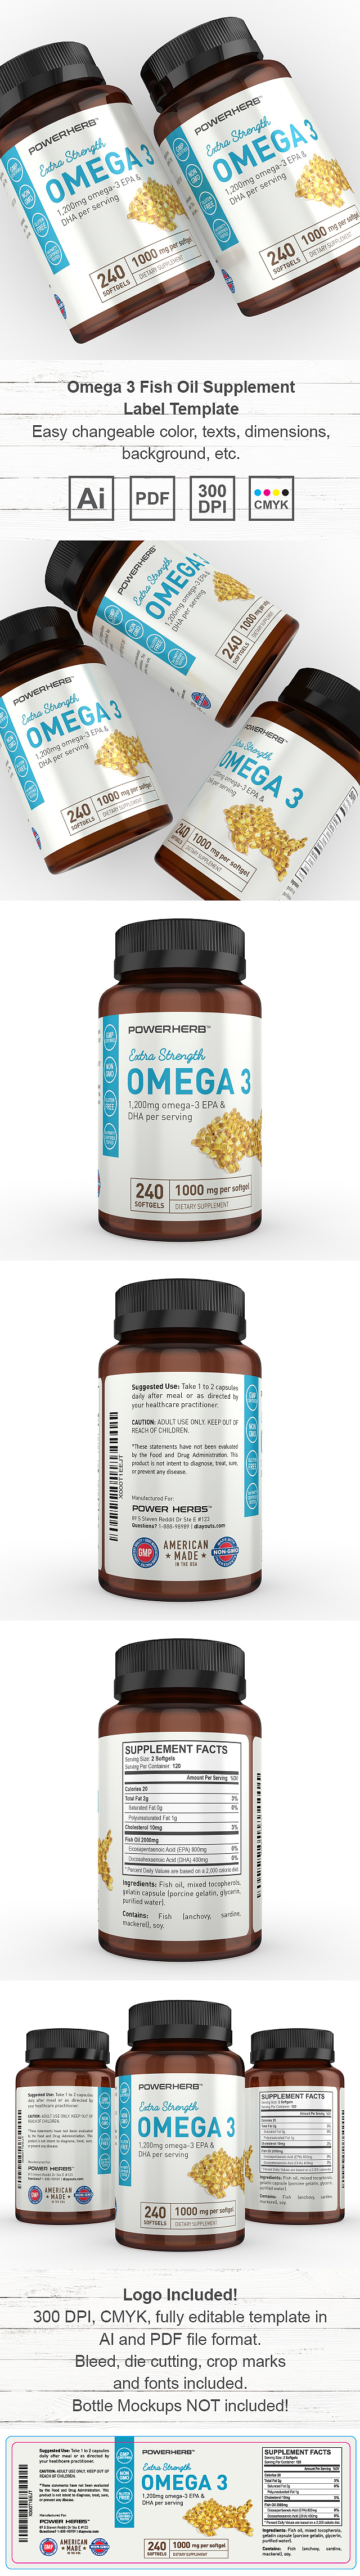 Omega 3 Fish Oil Supplement Label Template